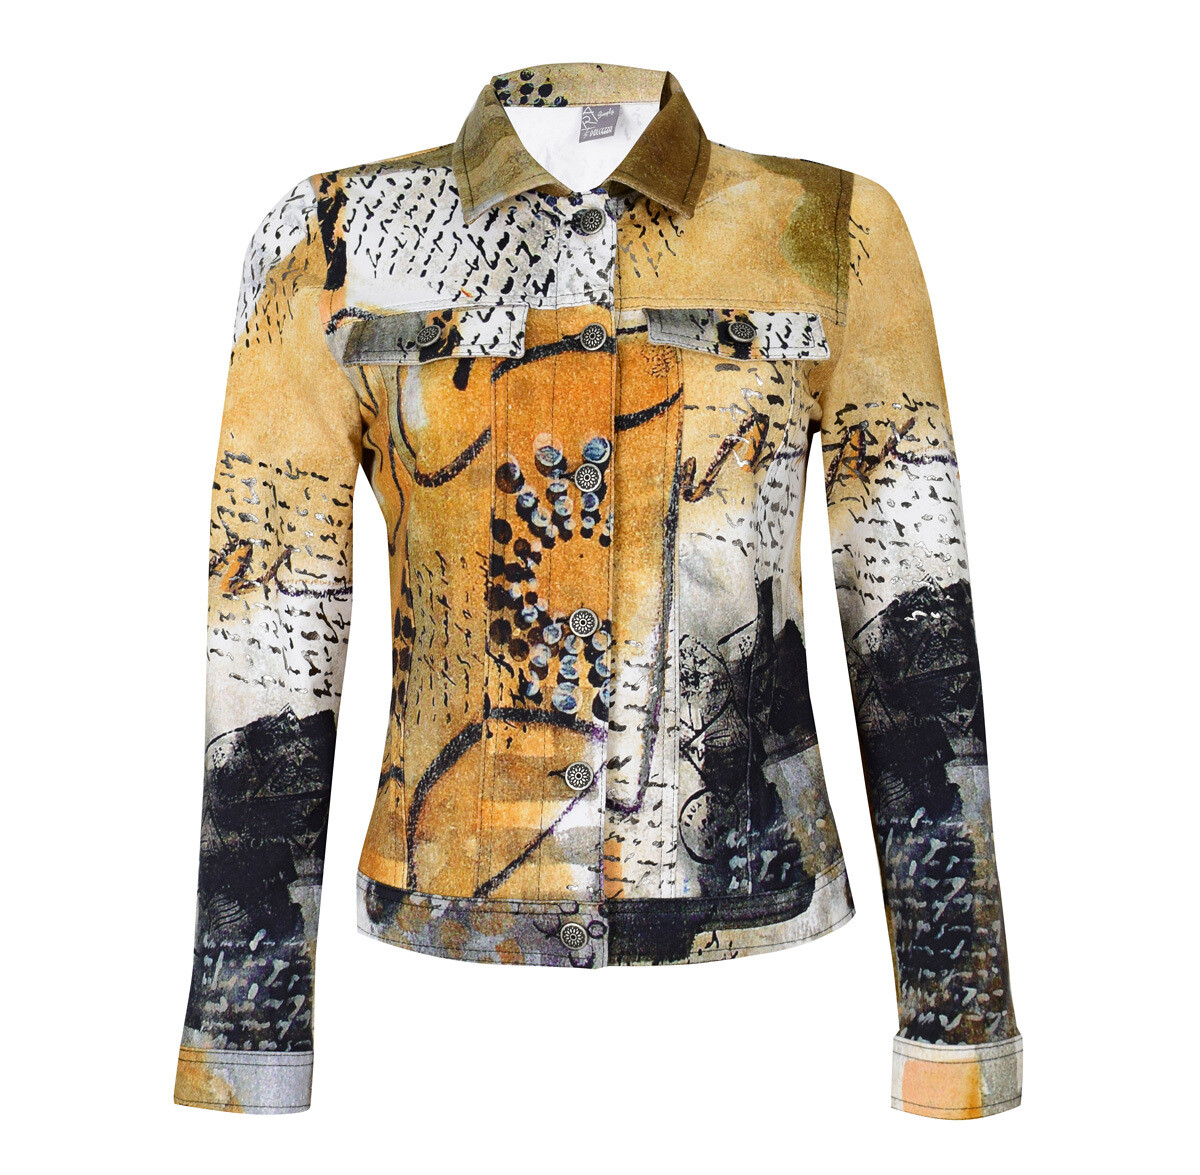 Simply Art Dolcezza: Romantic Rhythm Quilled Abstract Art Denim Jacket SOLD OUT